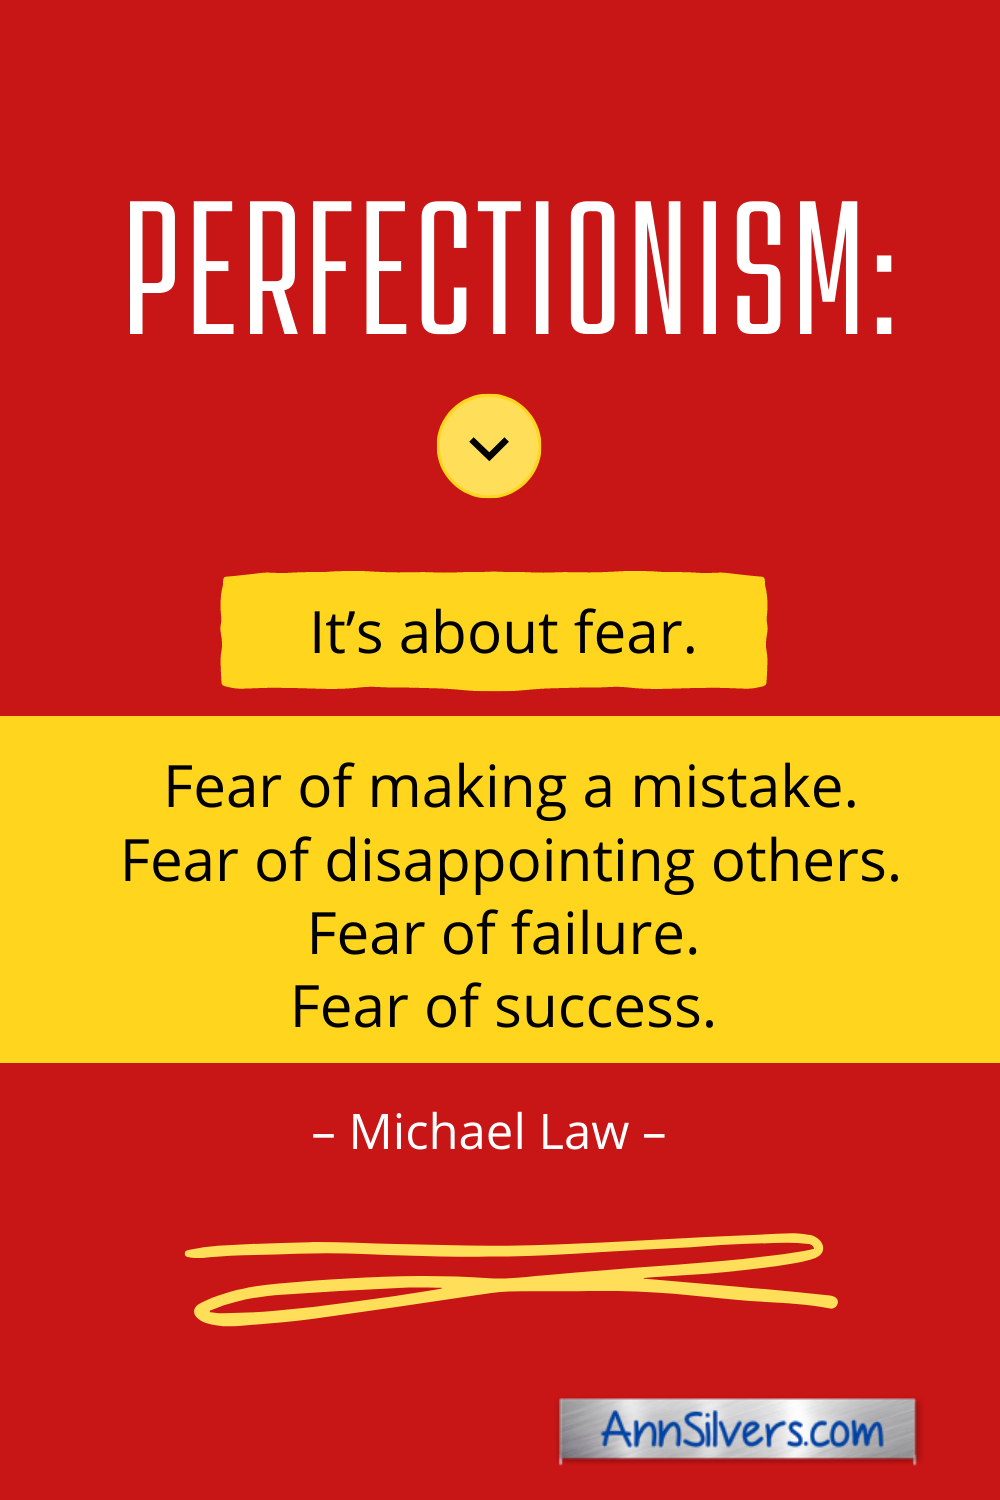 What is perfectionism? Perfectionism is about fear. Quote